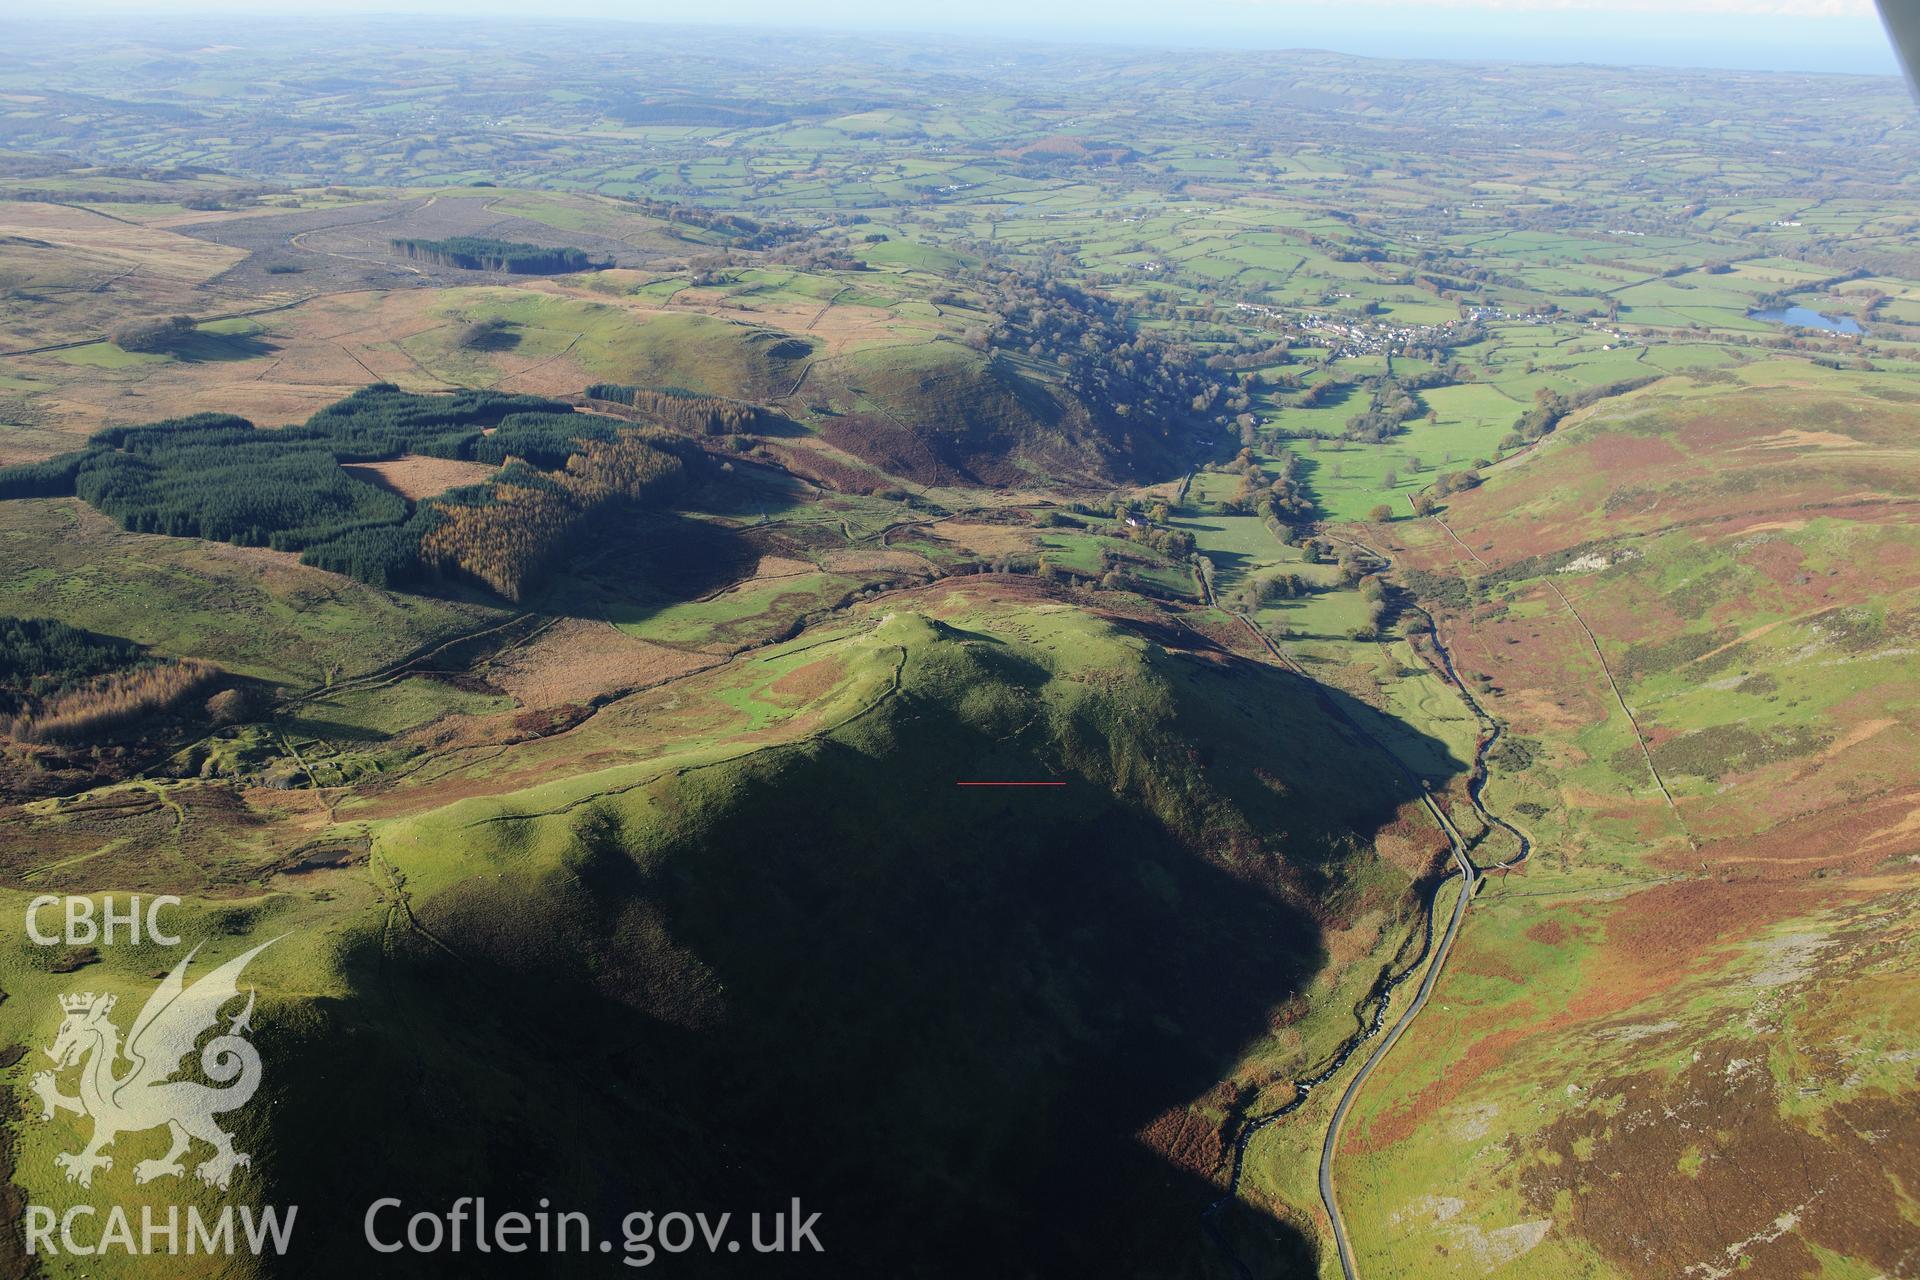 RCAHMW colour oblique photograph of Craig Curyll, landscape west to Llanddewi Brefi, with digital image error (red line). Taken by Toby Driver on 05/11/2012.